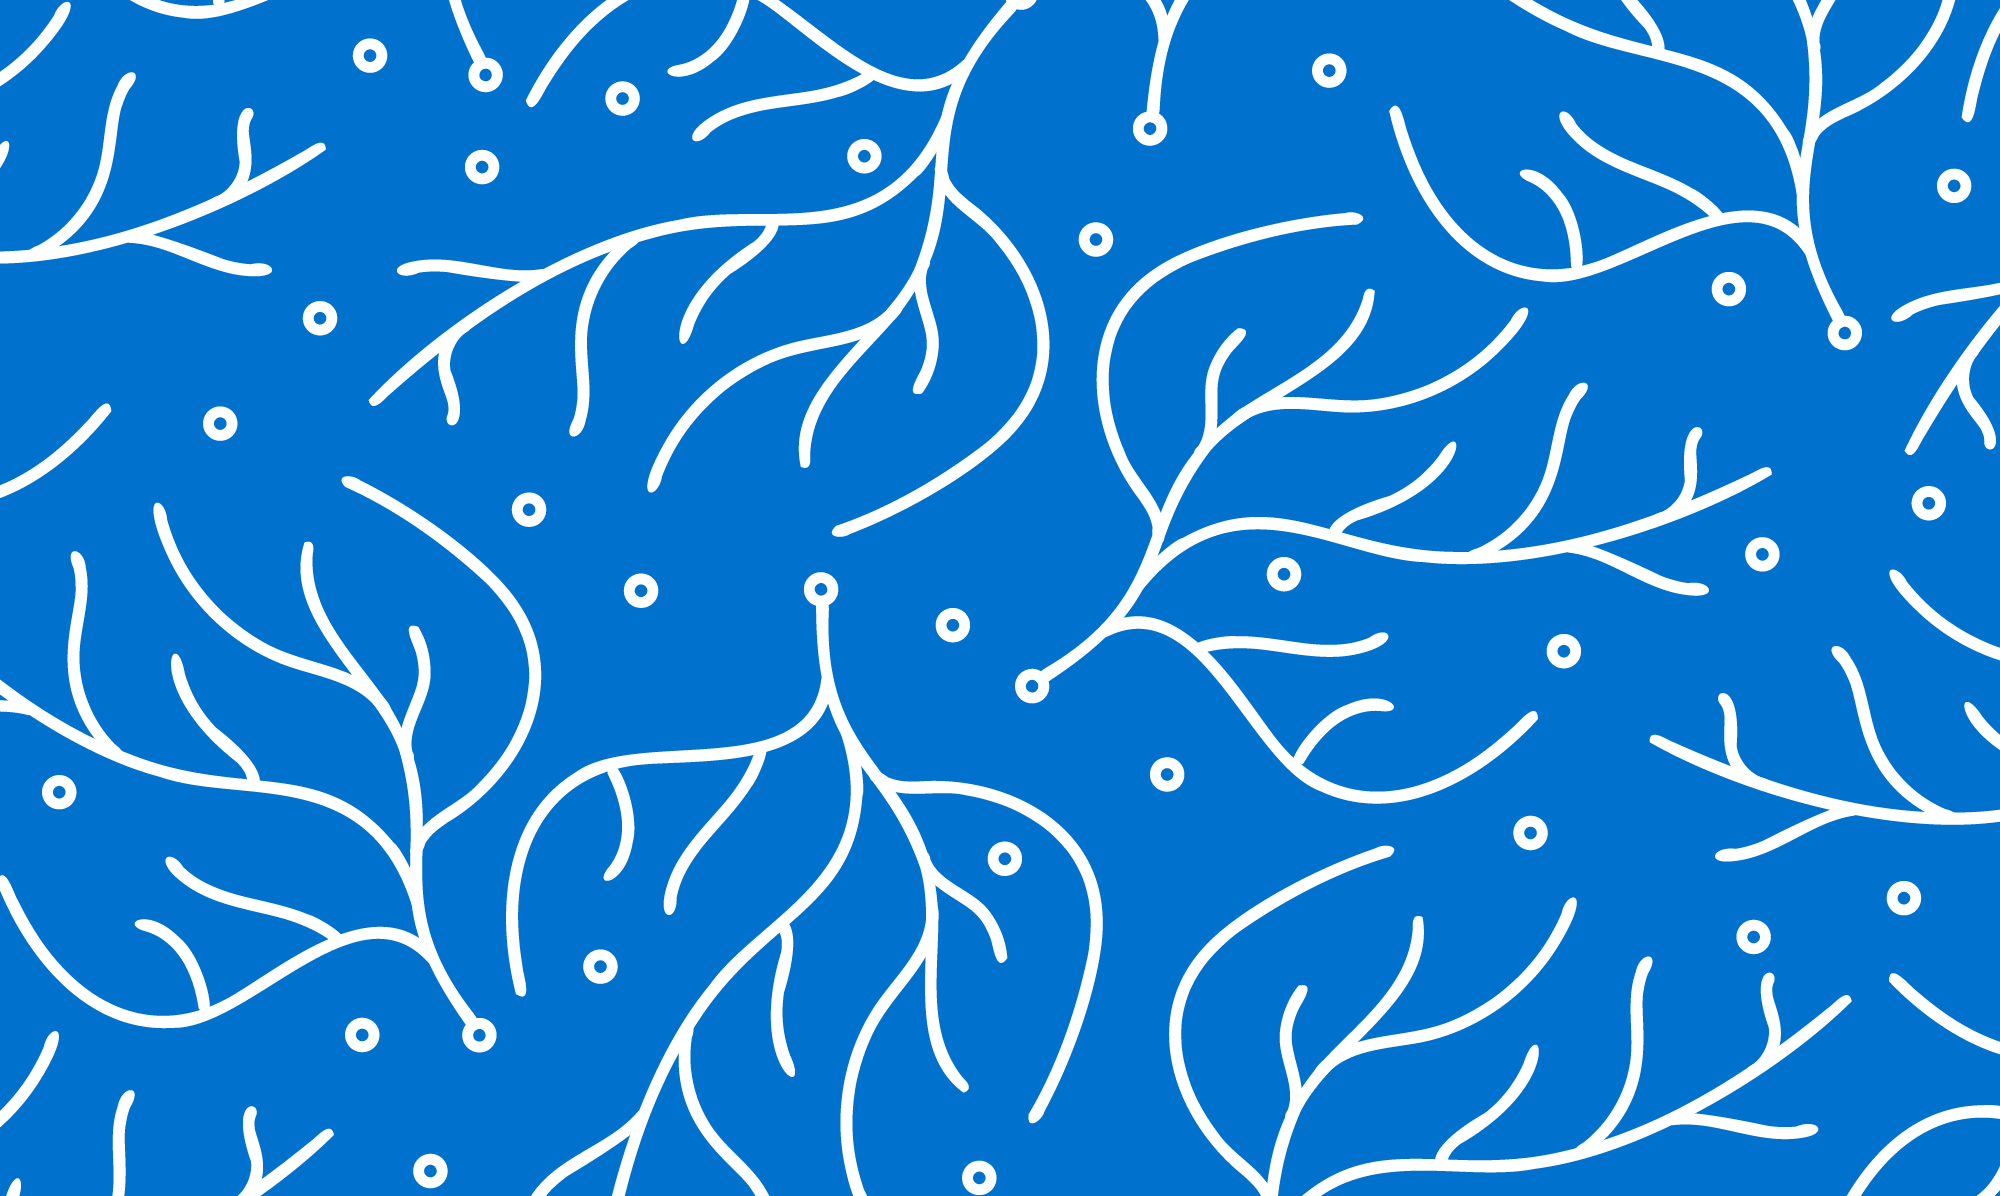 Pattern 2 - White on Blue@2000x.png